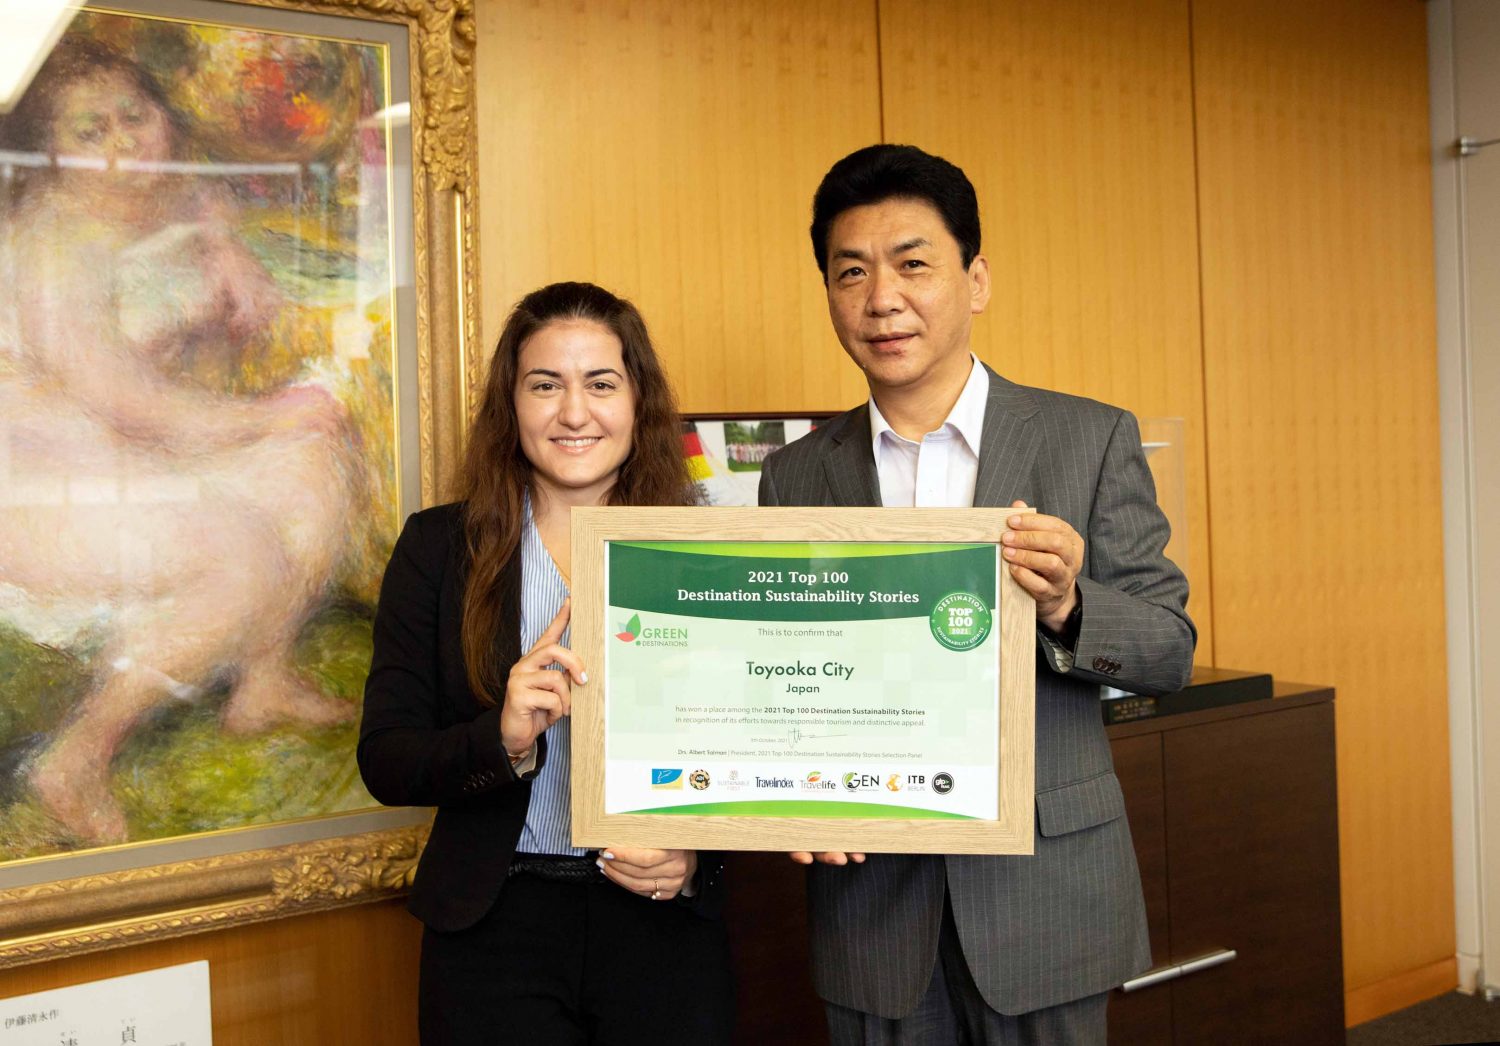 Mayor of Toyooka City, Mr Kunio Kannuki and Coordinator for International Relations at Toyooka City Hall Tourism Division, Ms Jade Nunez, receiving the Top 100 Green Destinations Certificate